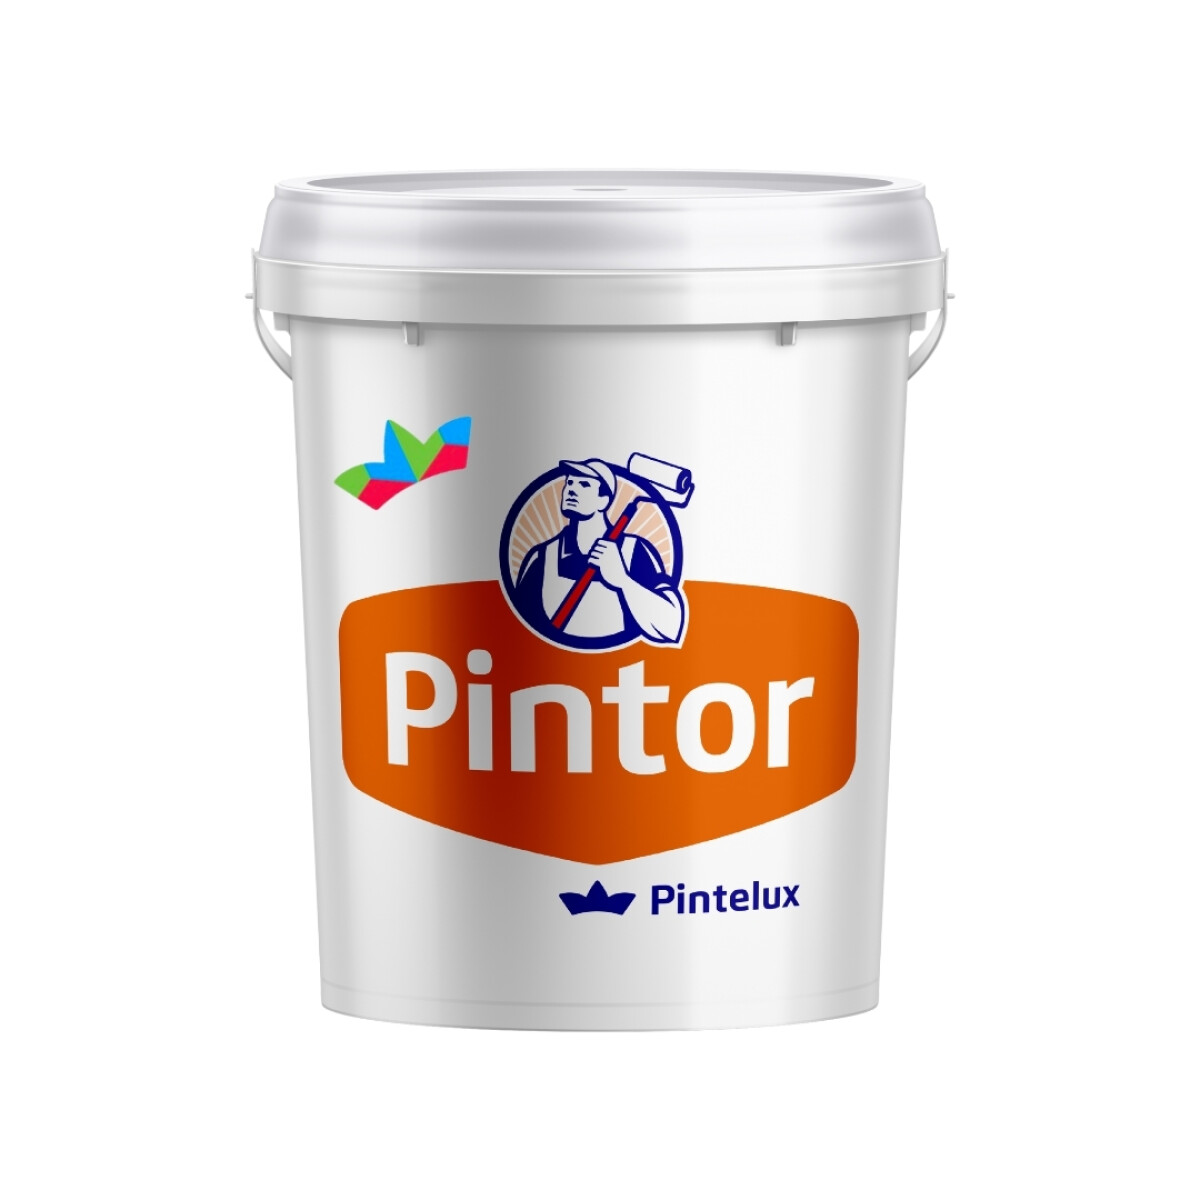 PINTOR MULTIPROPOSITO ROC - 1LT 